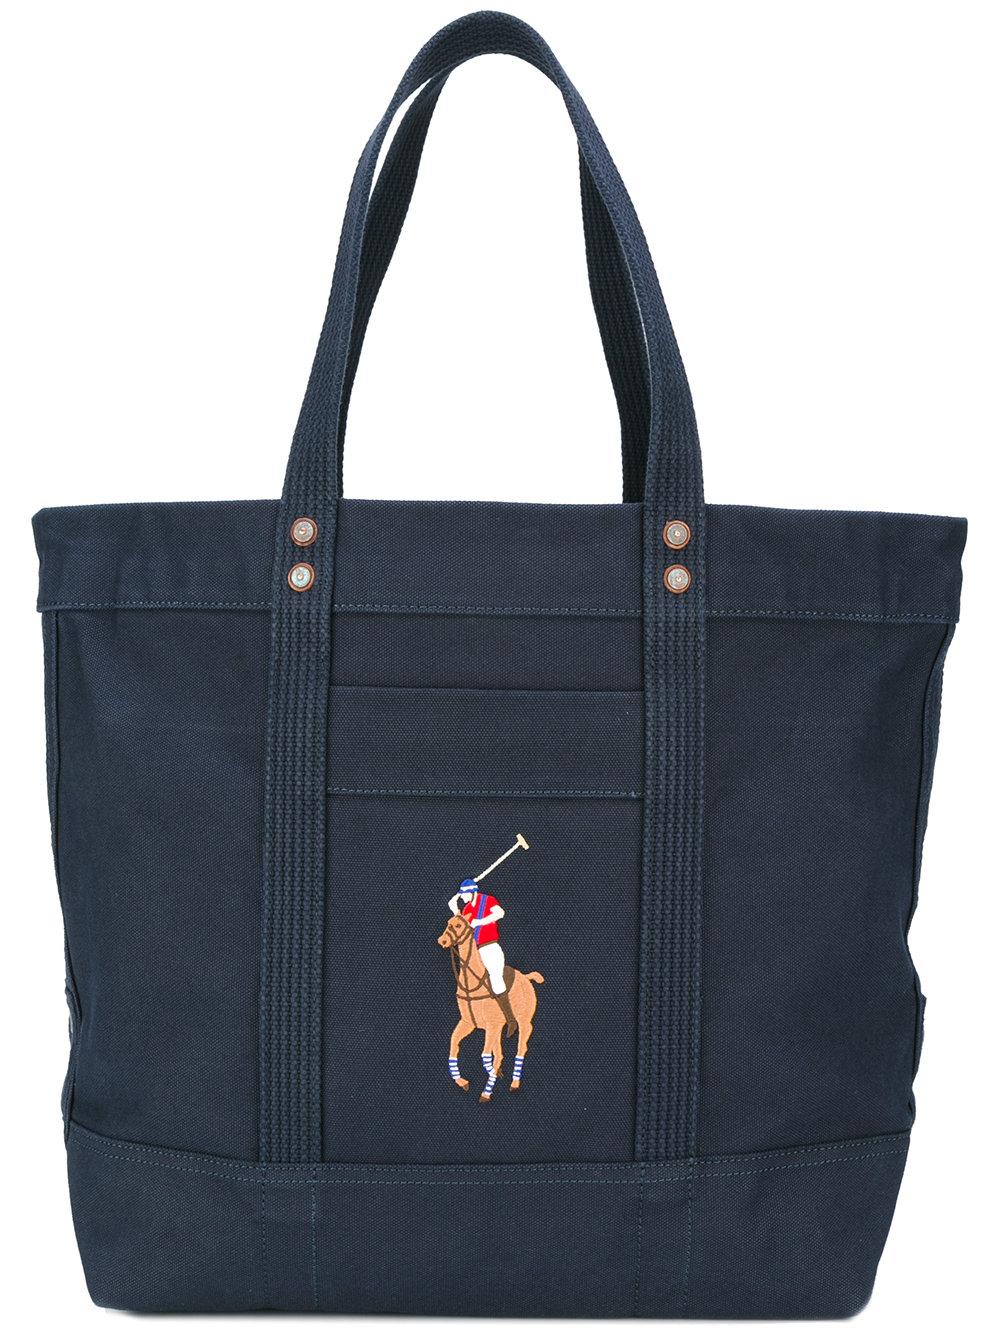 Polo Ralph Lauren Cotton Embroidered Logo Tote Bag in Blue - Lyst